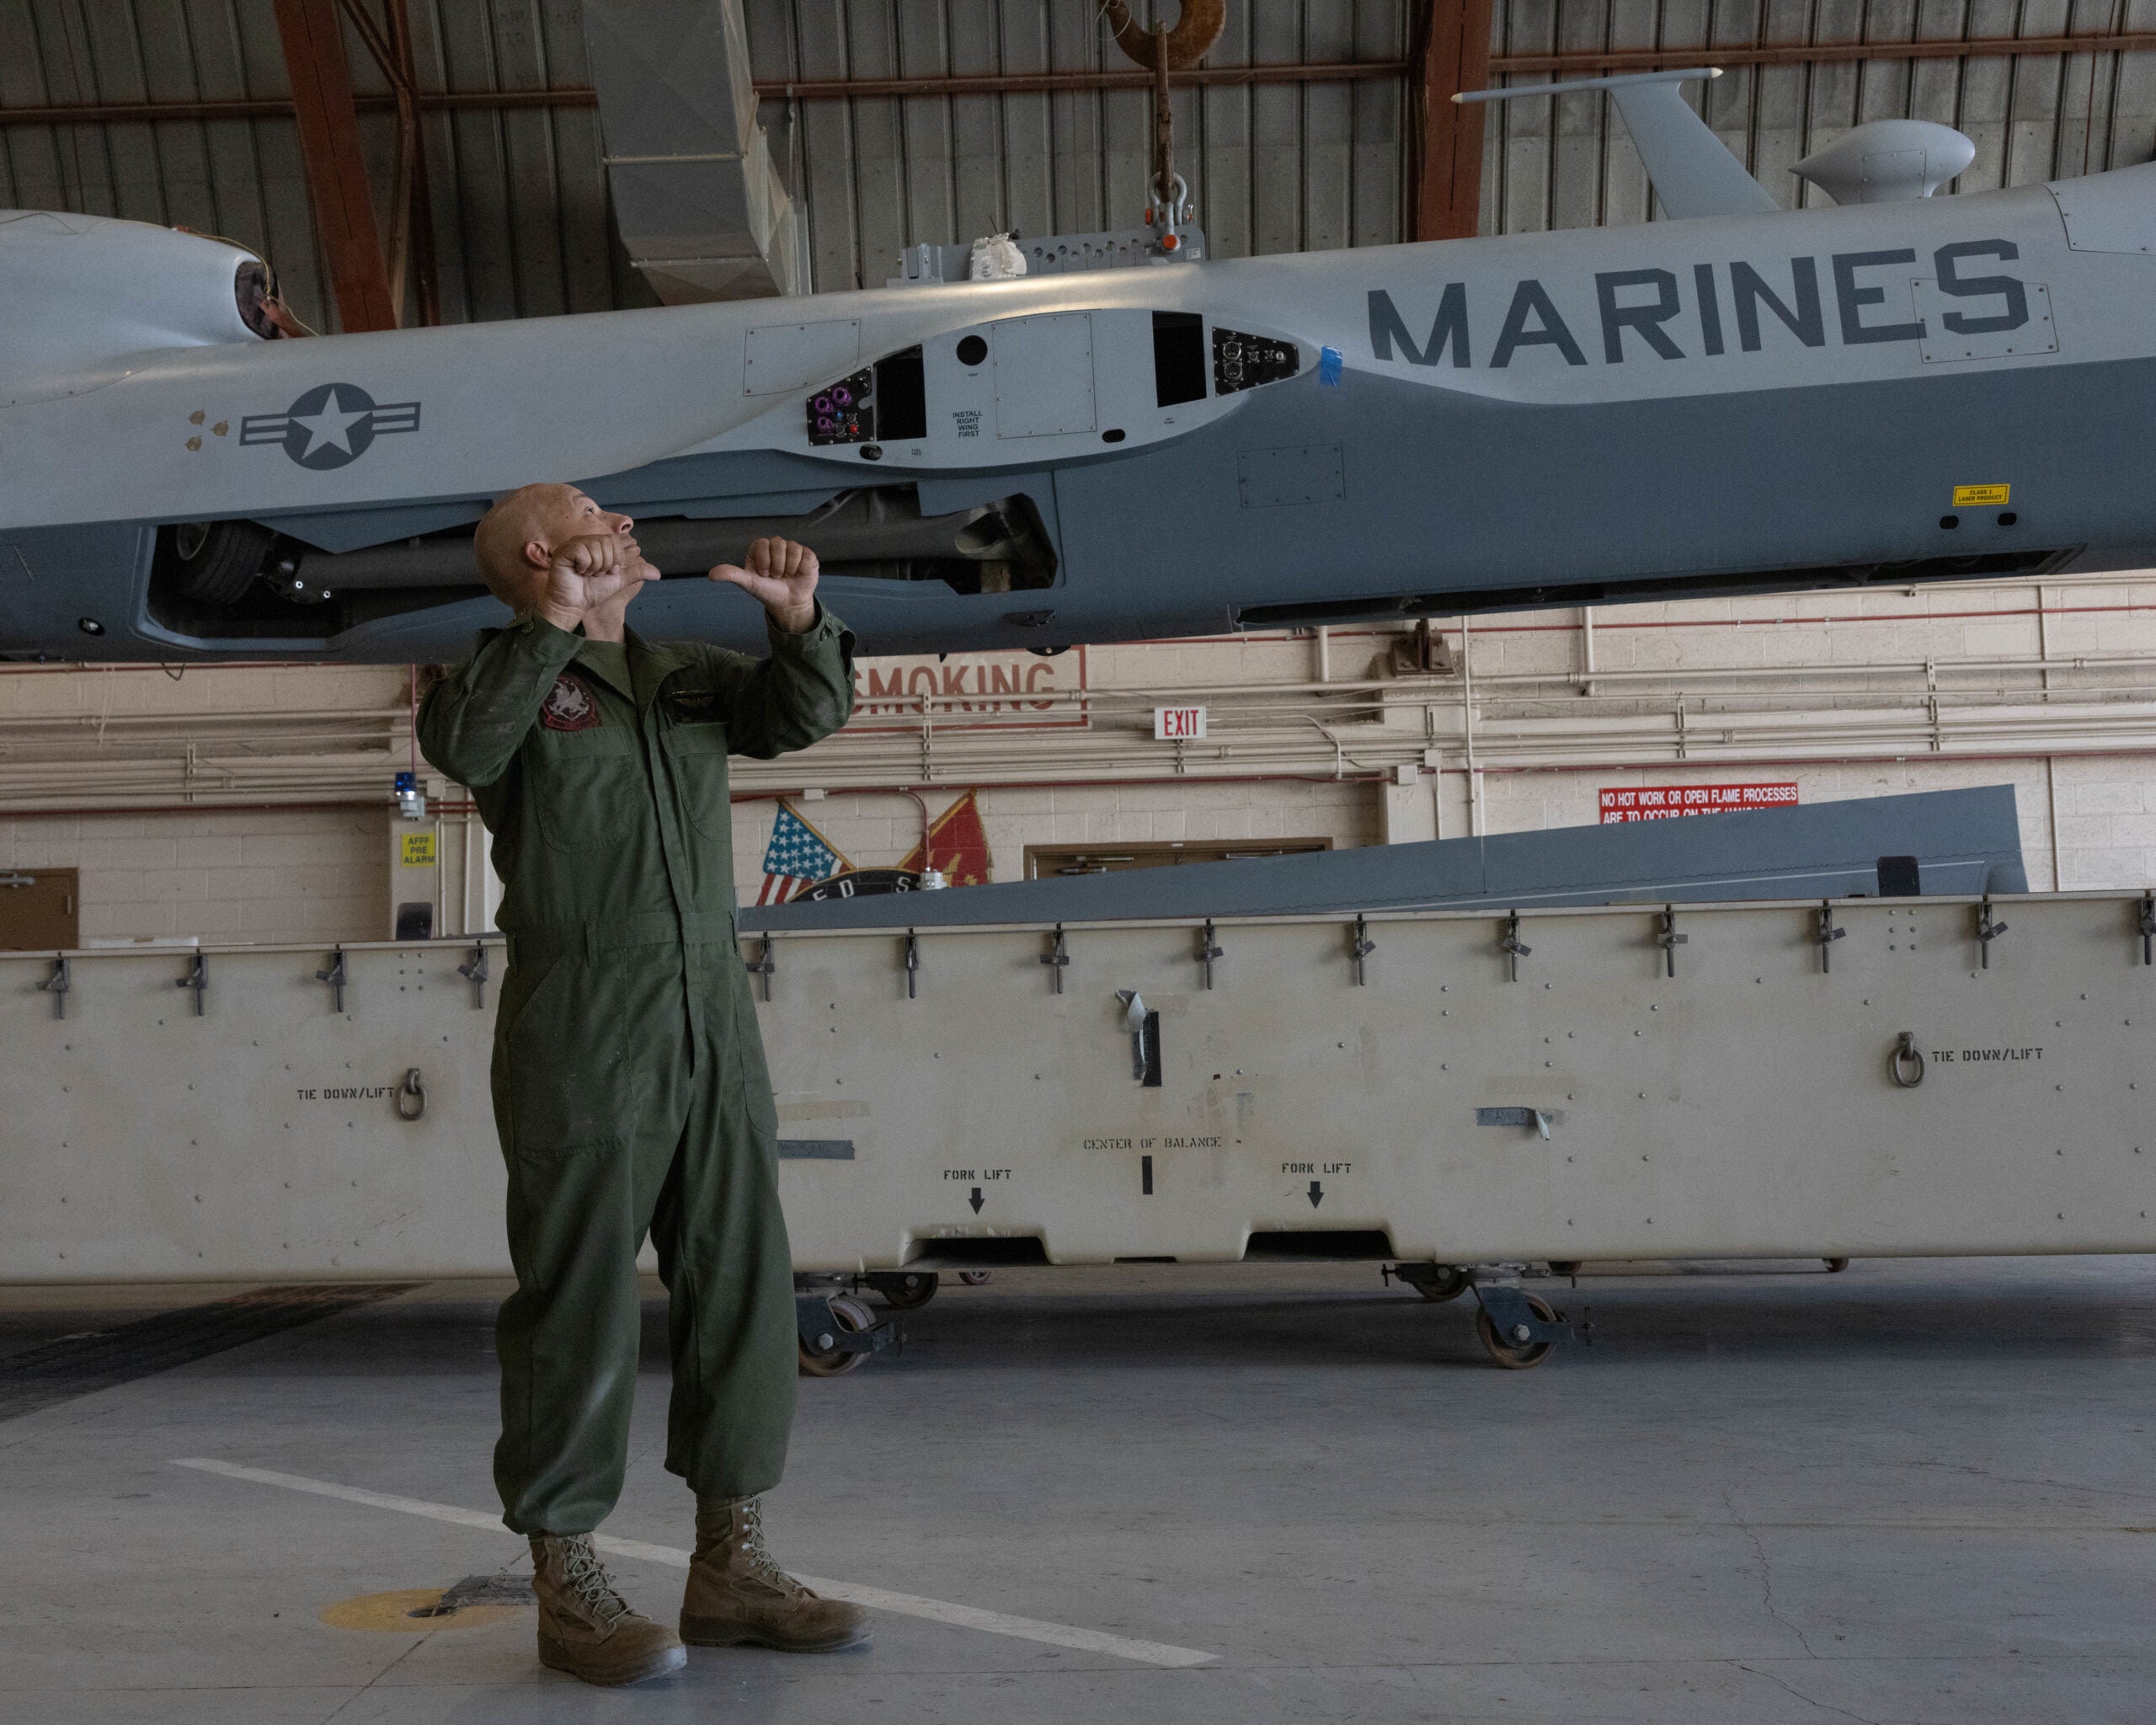 U.S. Marine Corps Staff Sgt. Ricardo Tijerina, airframes staff noncommissioned officer, Marine Operational Test and Evaluation Squadron (VMX) 1, assists in the unloading of the MQ-9A Reaper with Marine Unmanned Aerial Vehicle Squadron (VMU) 1, Marine Aircraft Group 13, 3rd Marine Aircraft Wing, at Marine Corps Air Station (MCAS) Yuma, Arizona, Sept. 28, 2022. The disassembly, transport, and reassembly of the platform between MCAS Yuma and MCAS Miramar, California via a U.S. Marine Corps KC-130J Hercules aircraft served as a proof of concept for the Reaper's rapid, expeditionary deployment capacity. (U.S. Marine Corps photo by Lance Cpl. Jade Venegas)